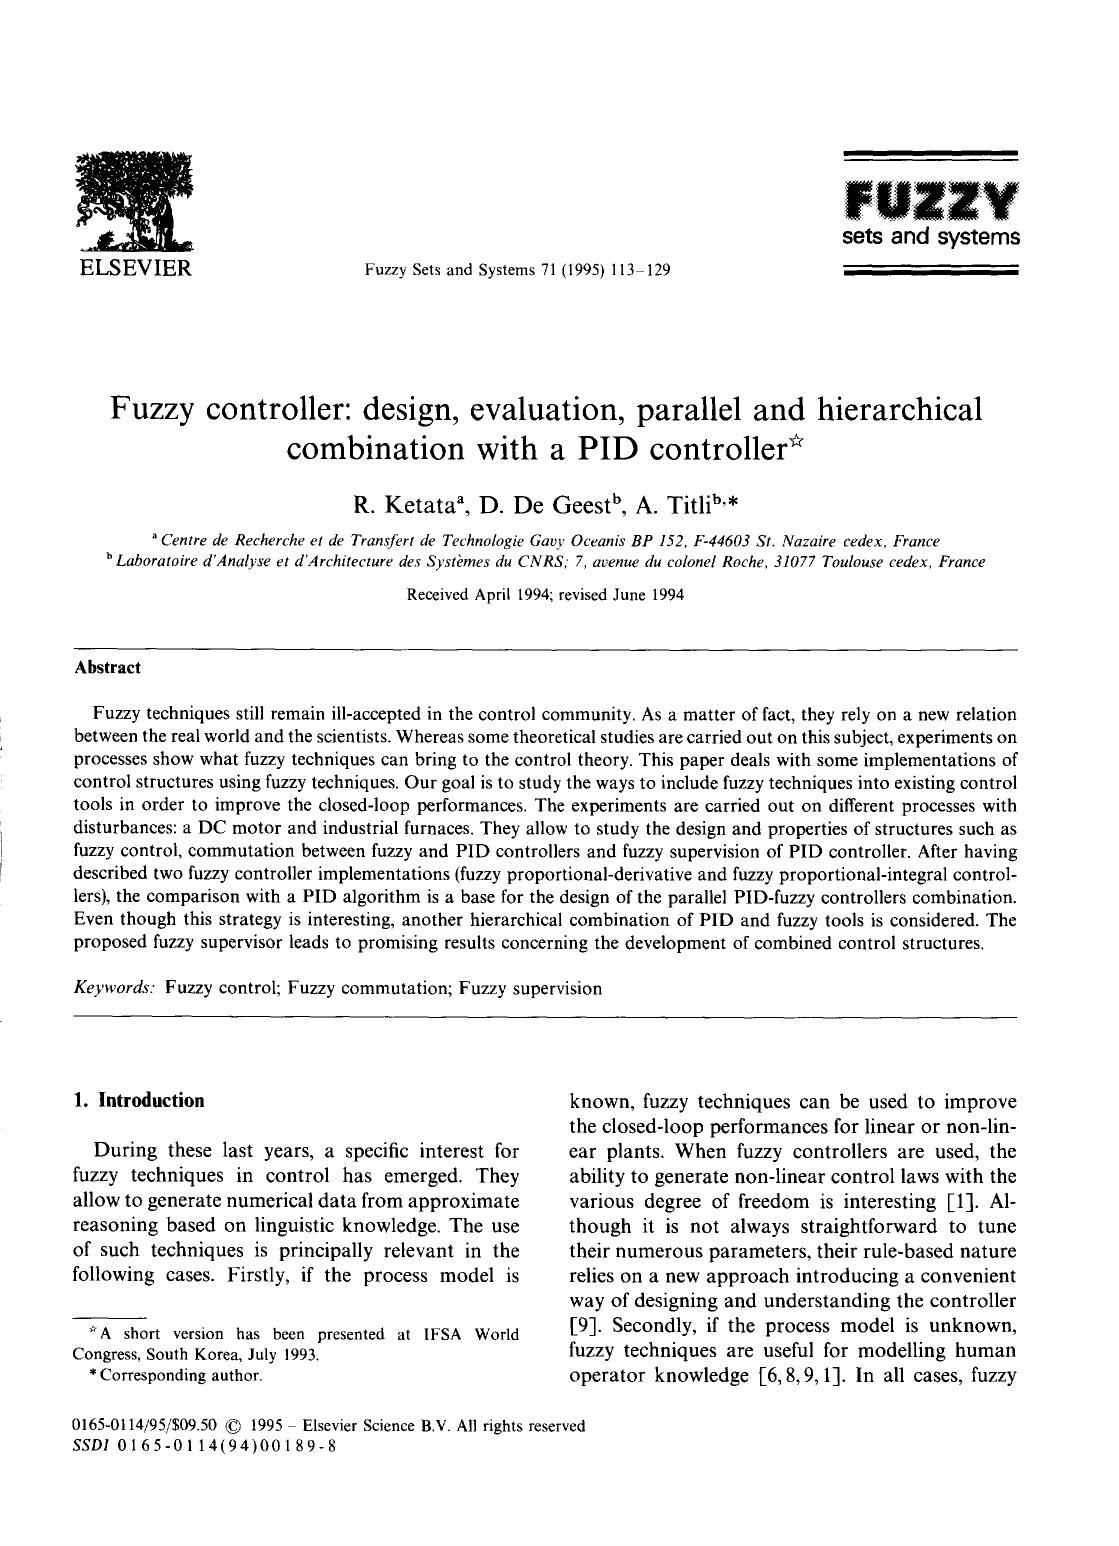 Fuzzy controller.Design,evaluation,parallel and hierarchical combination with a PID controller - Paper